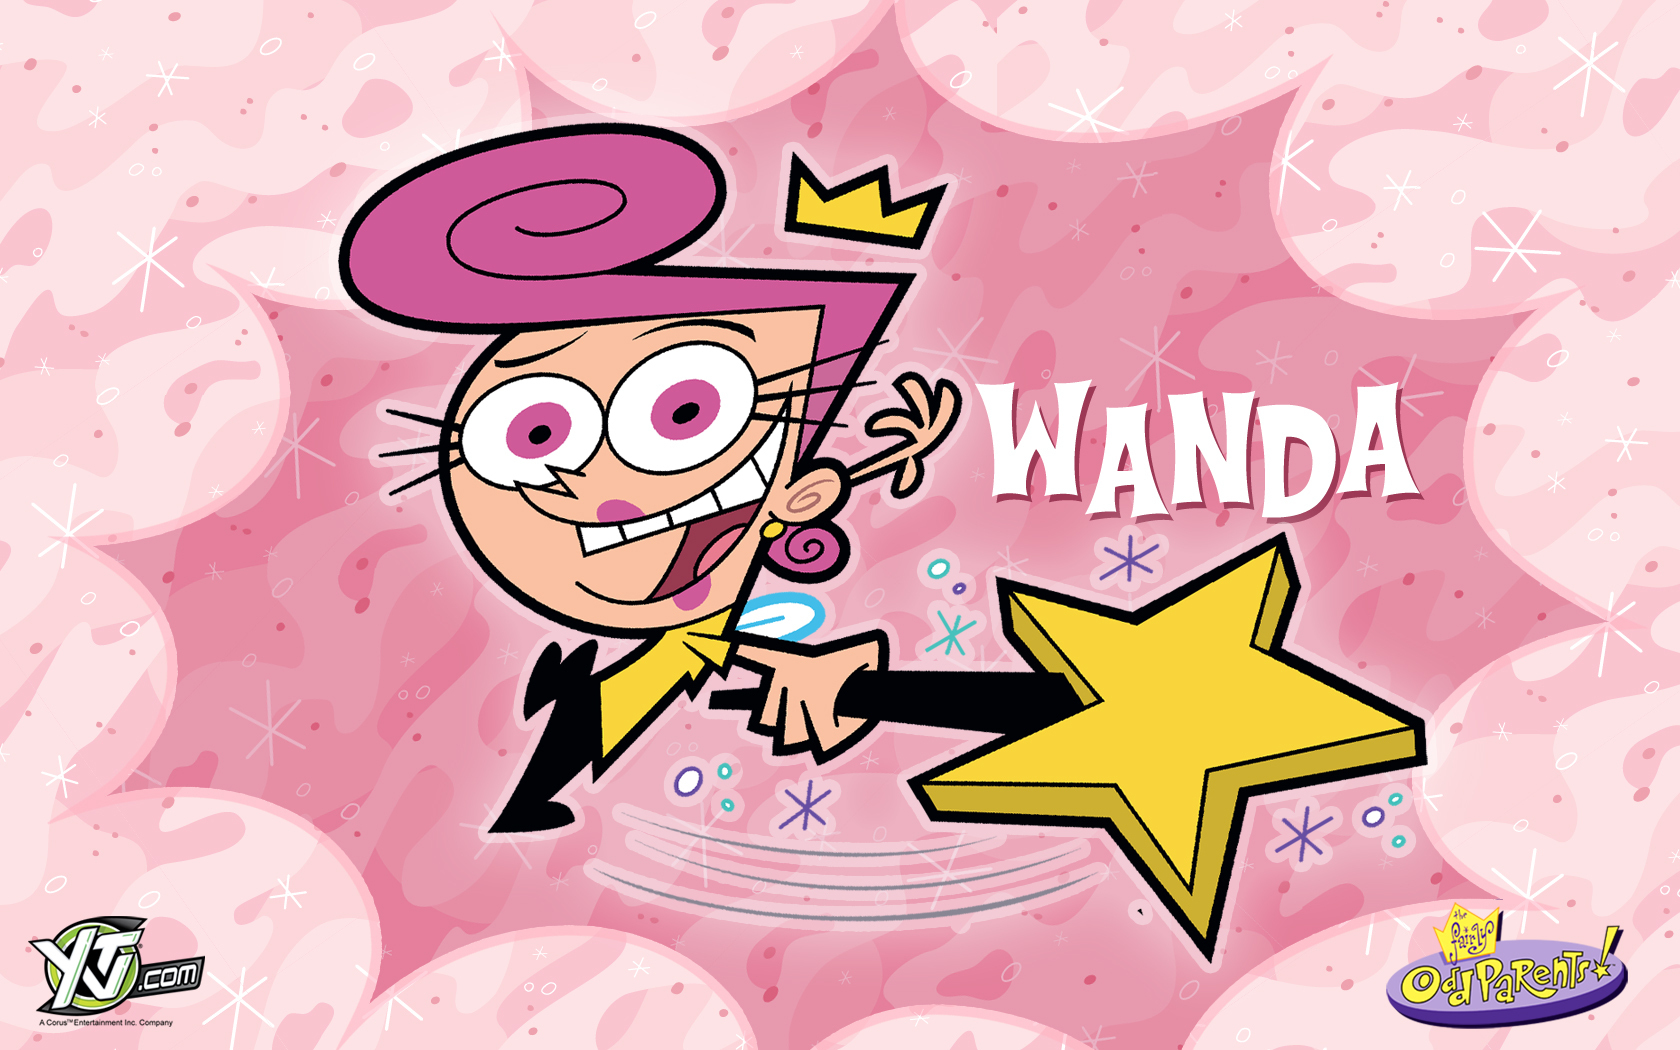 - The Fairly OddParents Wallpaper (23195971) - Fanpop.